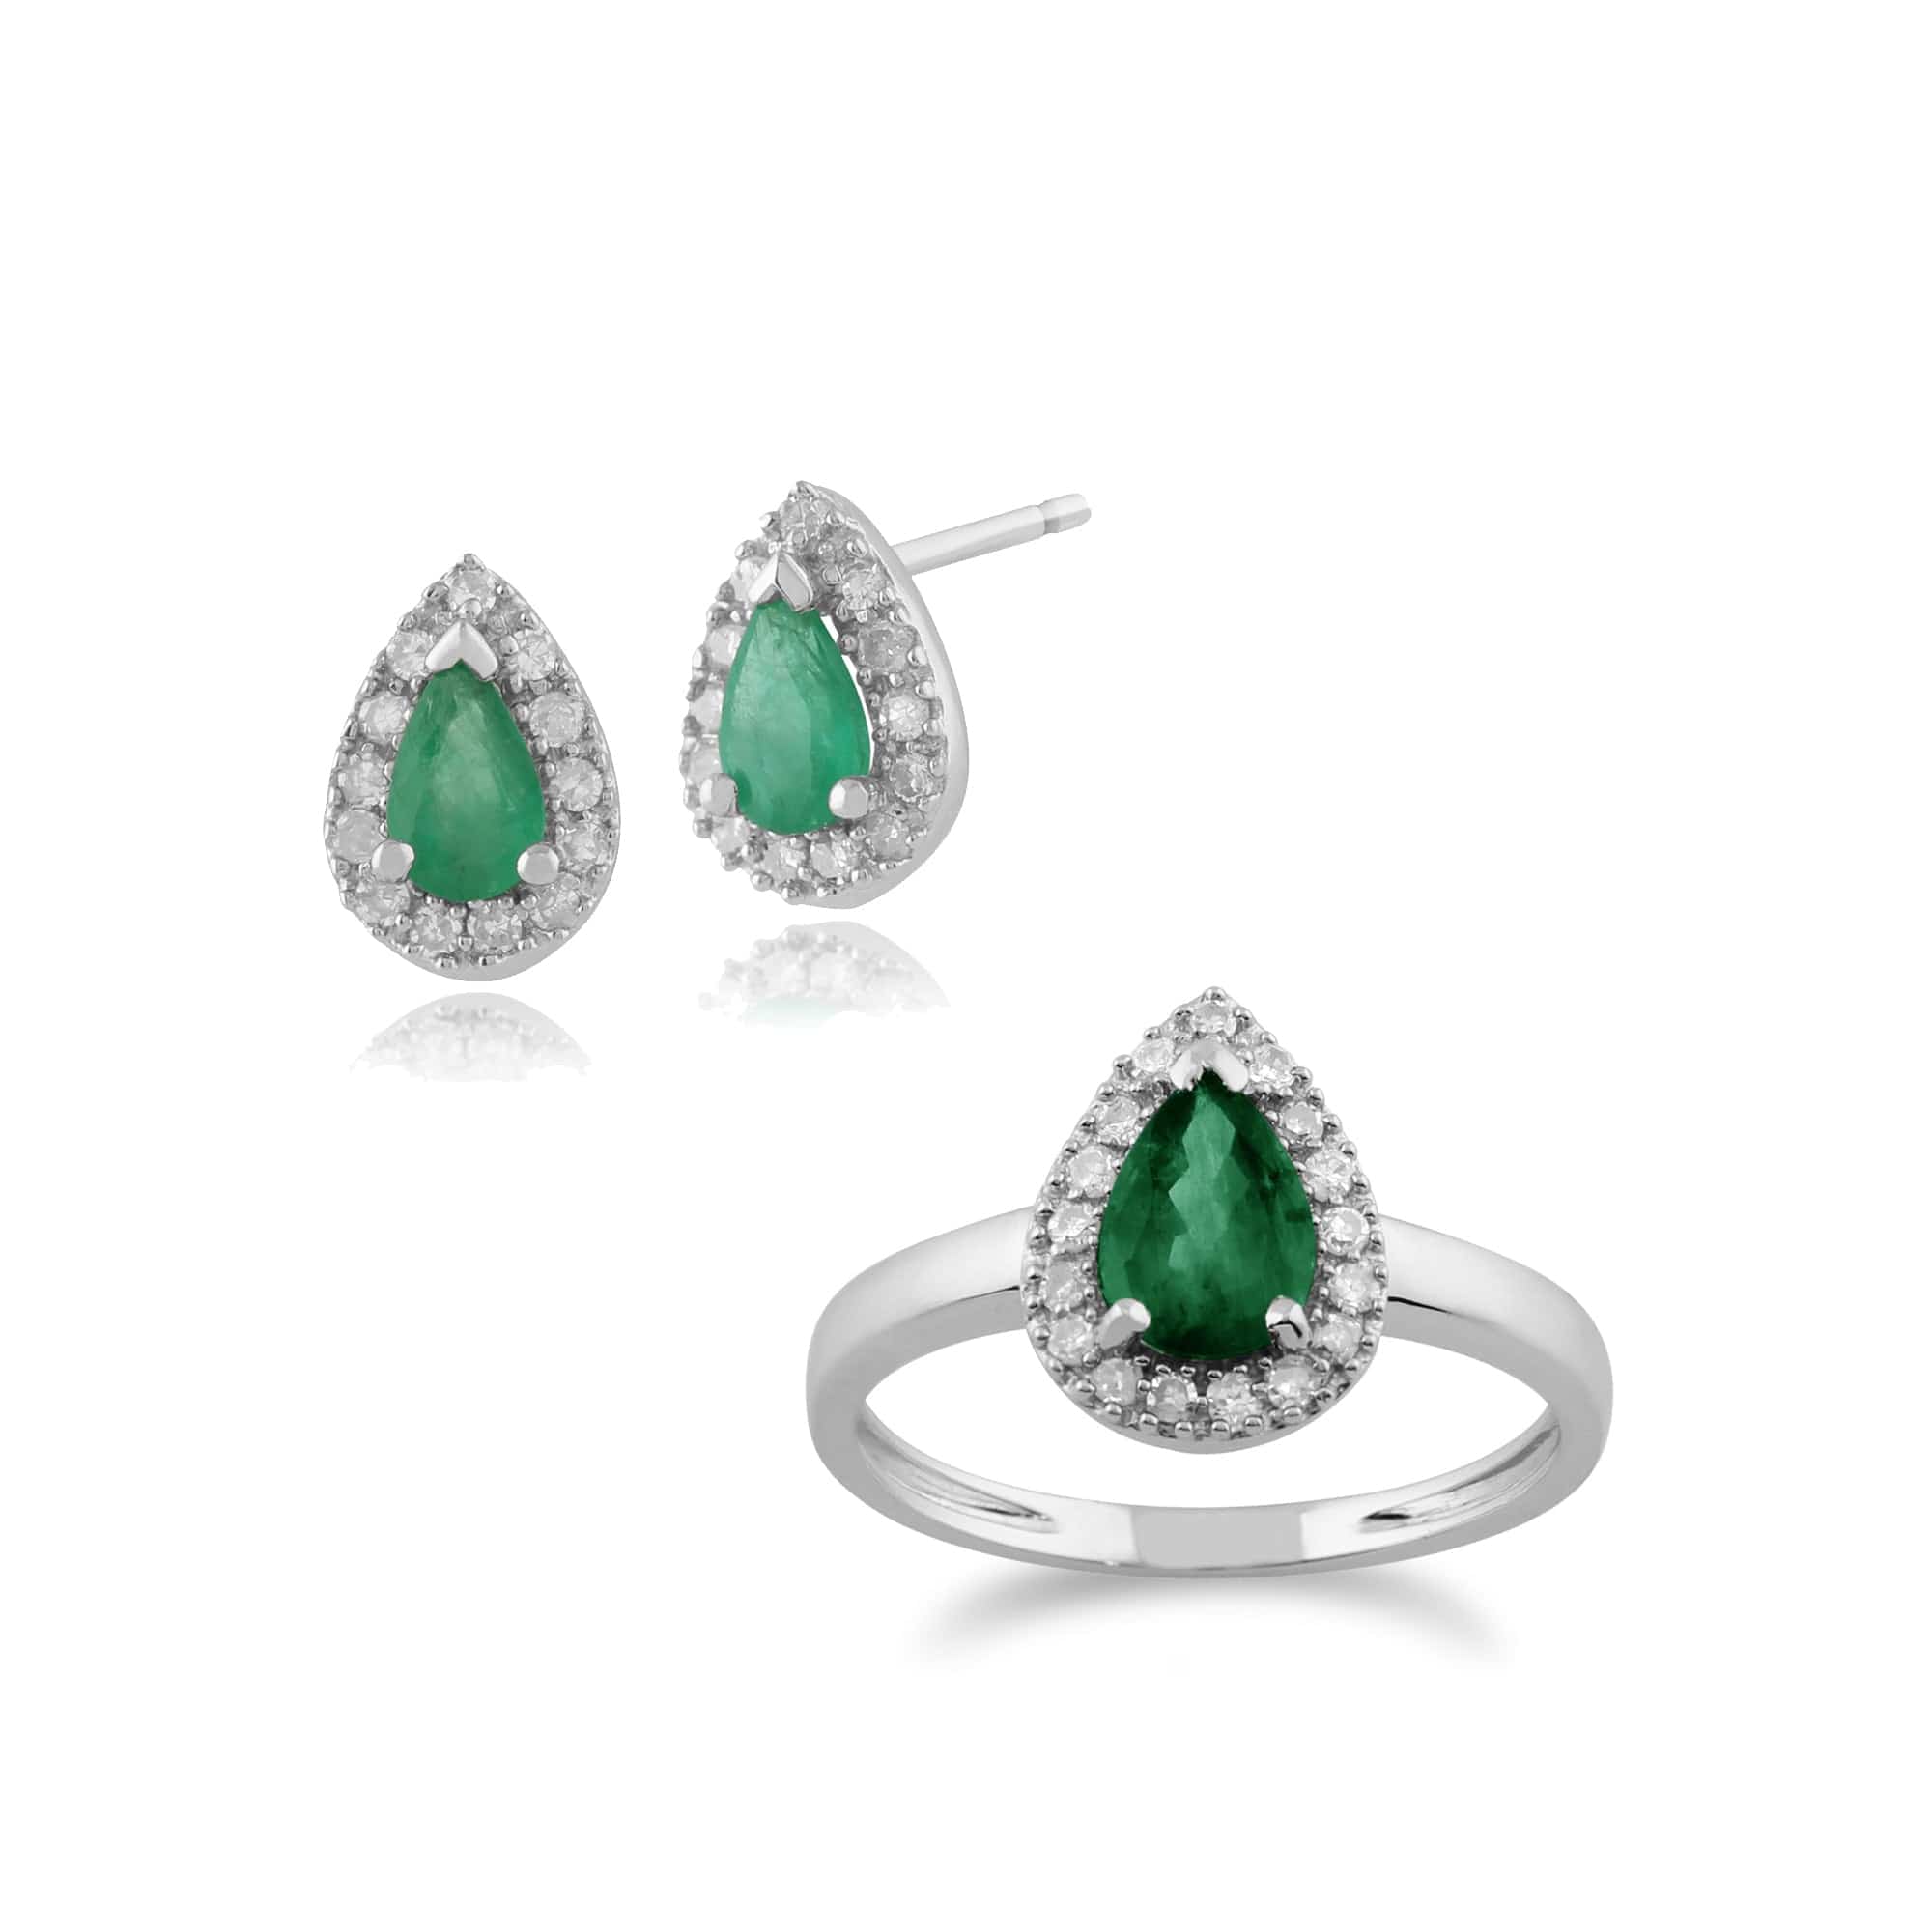 123E0693039-117R0164019 Classic Pear Emerald & Diamond Halo Stud Earrings & Ring Set in 9ct White Gold 1